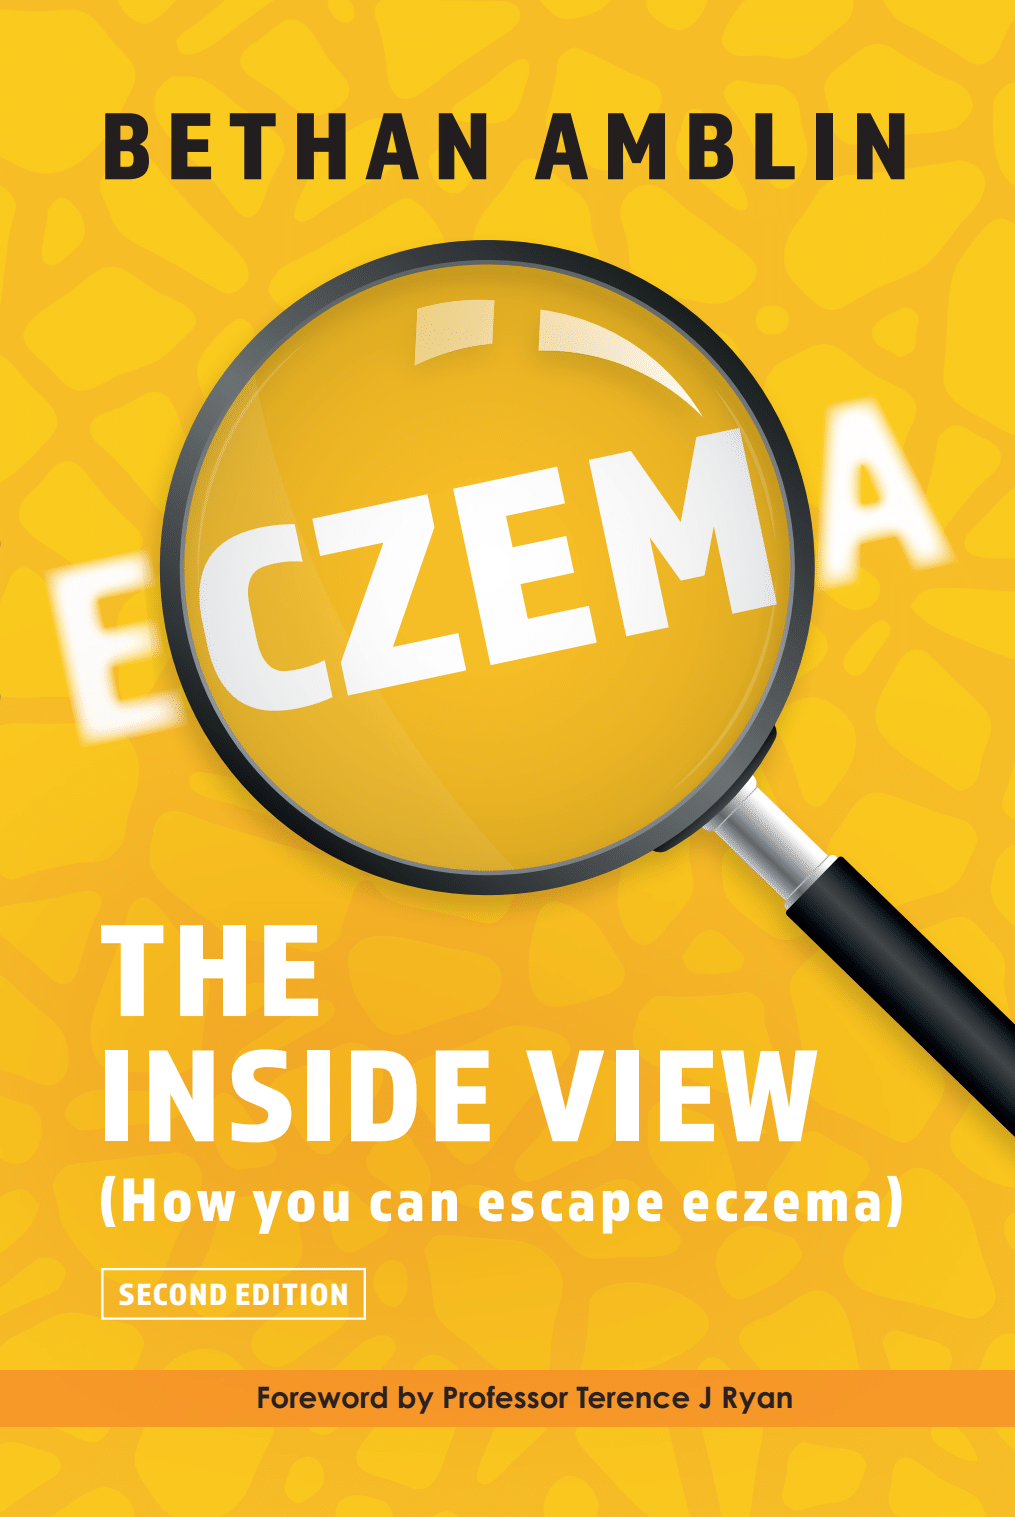 Eczema. The inside view. 2nd edition. - Digital Edition